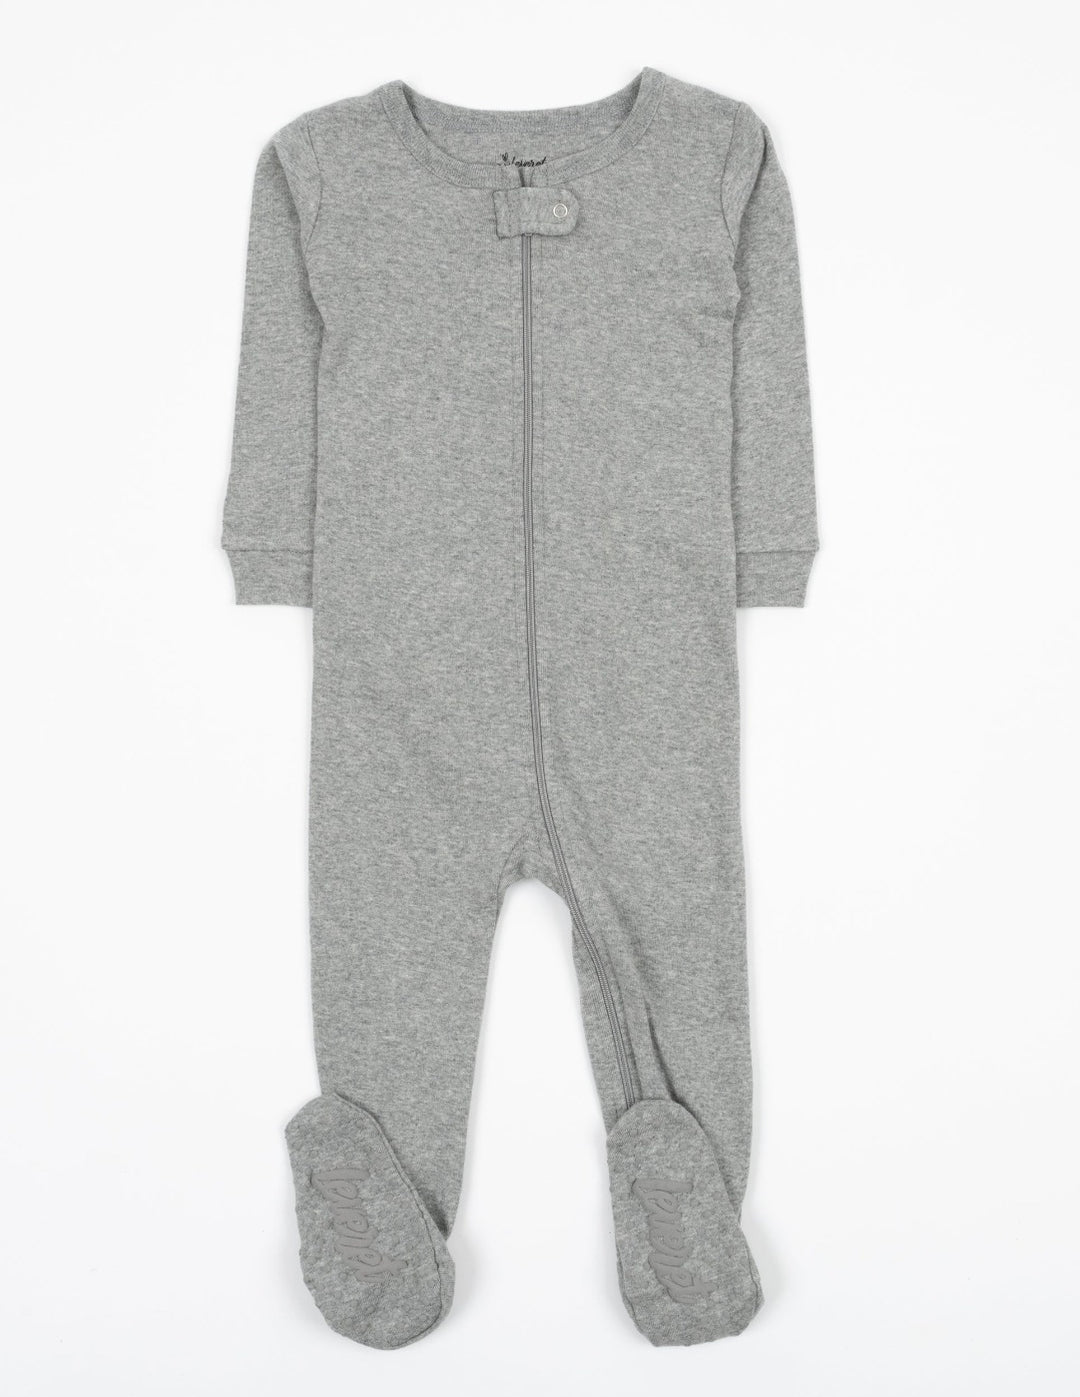 solid color light grey baby footed pajamas